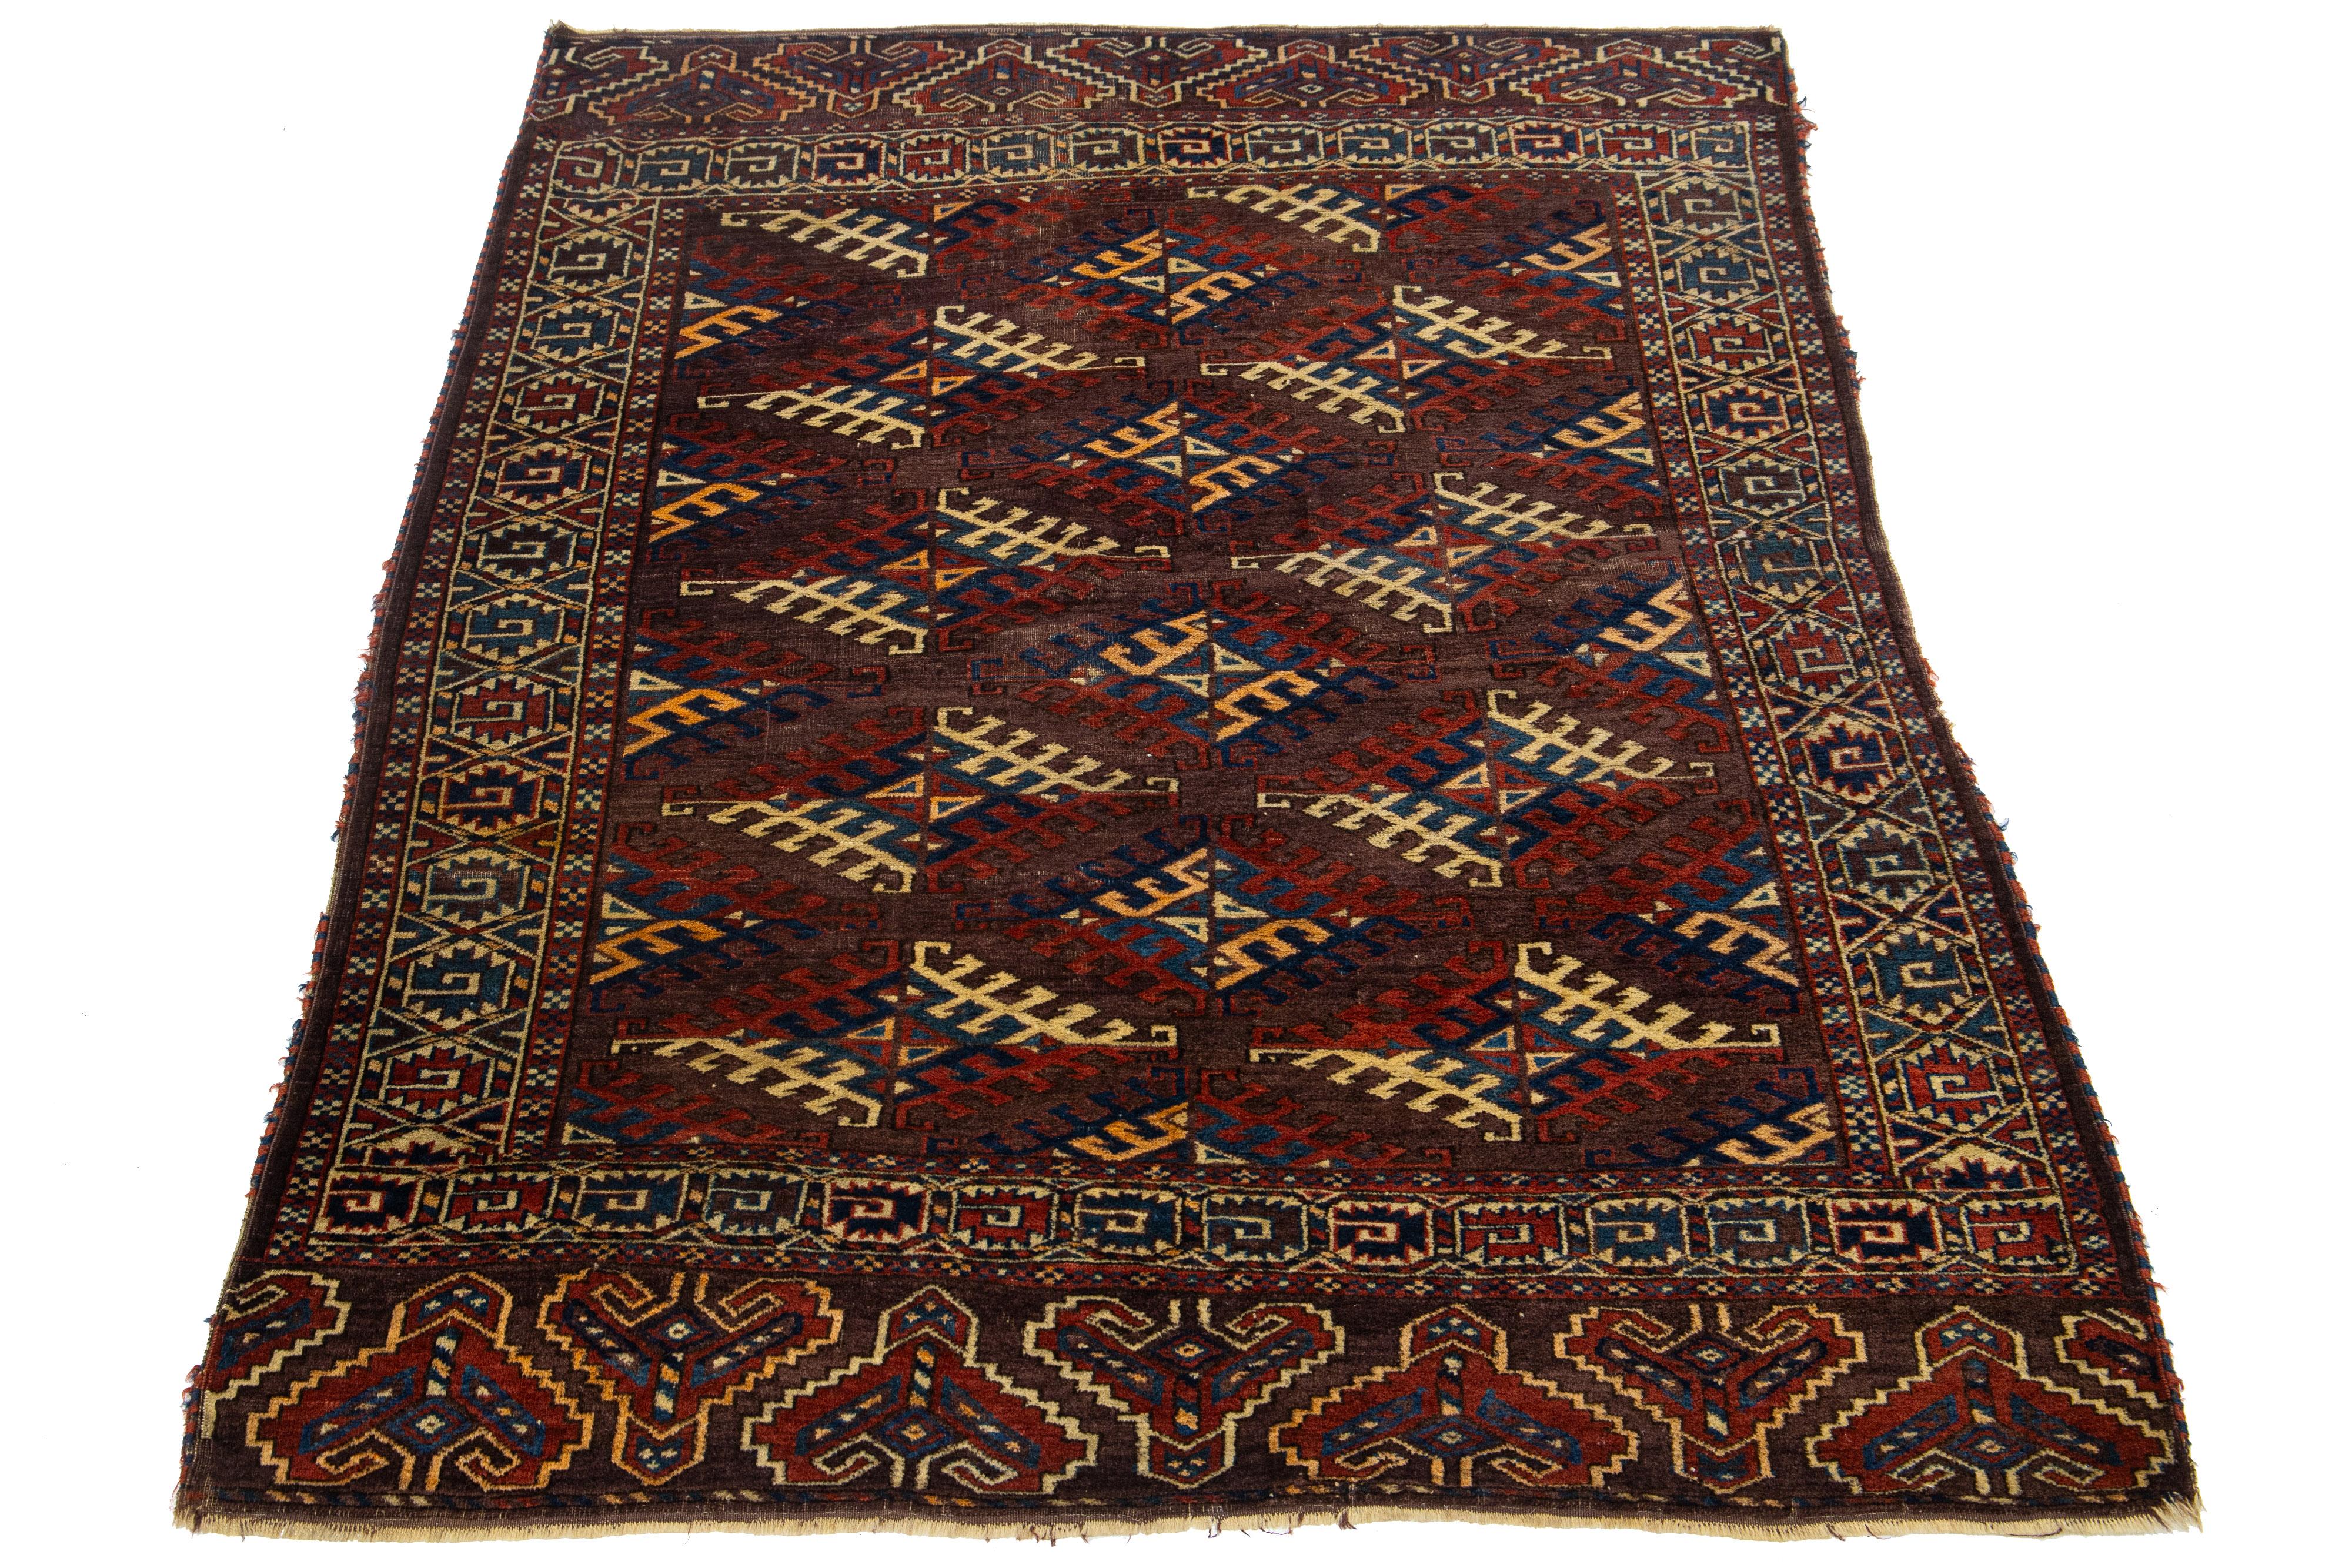 This elegant antique Turkmen rug is hand-knotted with high-quality wool and features a warm brown-colored field. The design showcases a captivating Gul pattern adorned with shades of red, orange, beige, and blue.

This rug measures 4'2